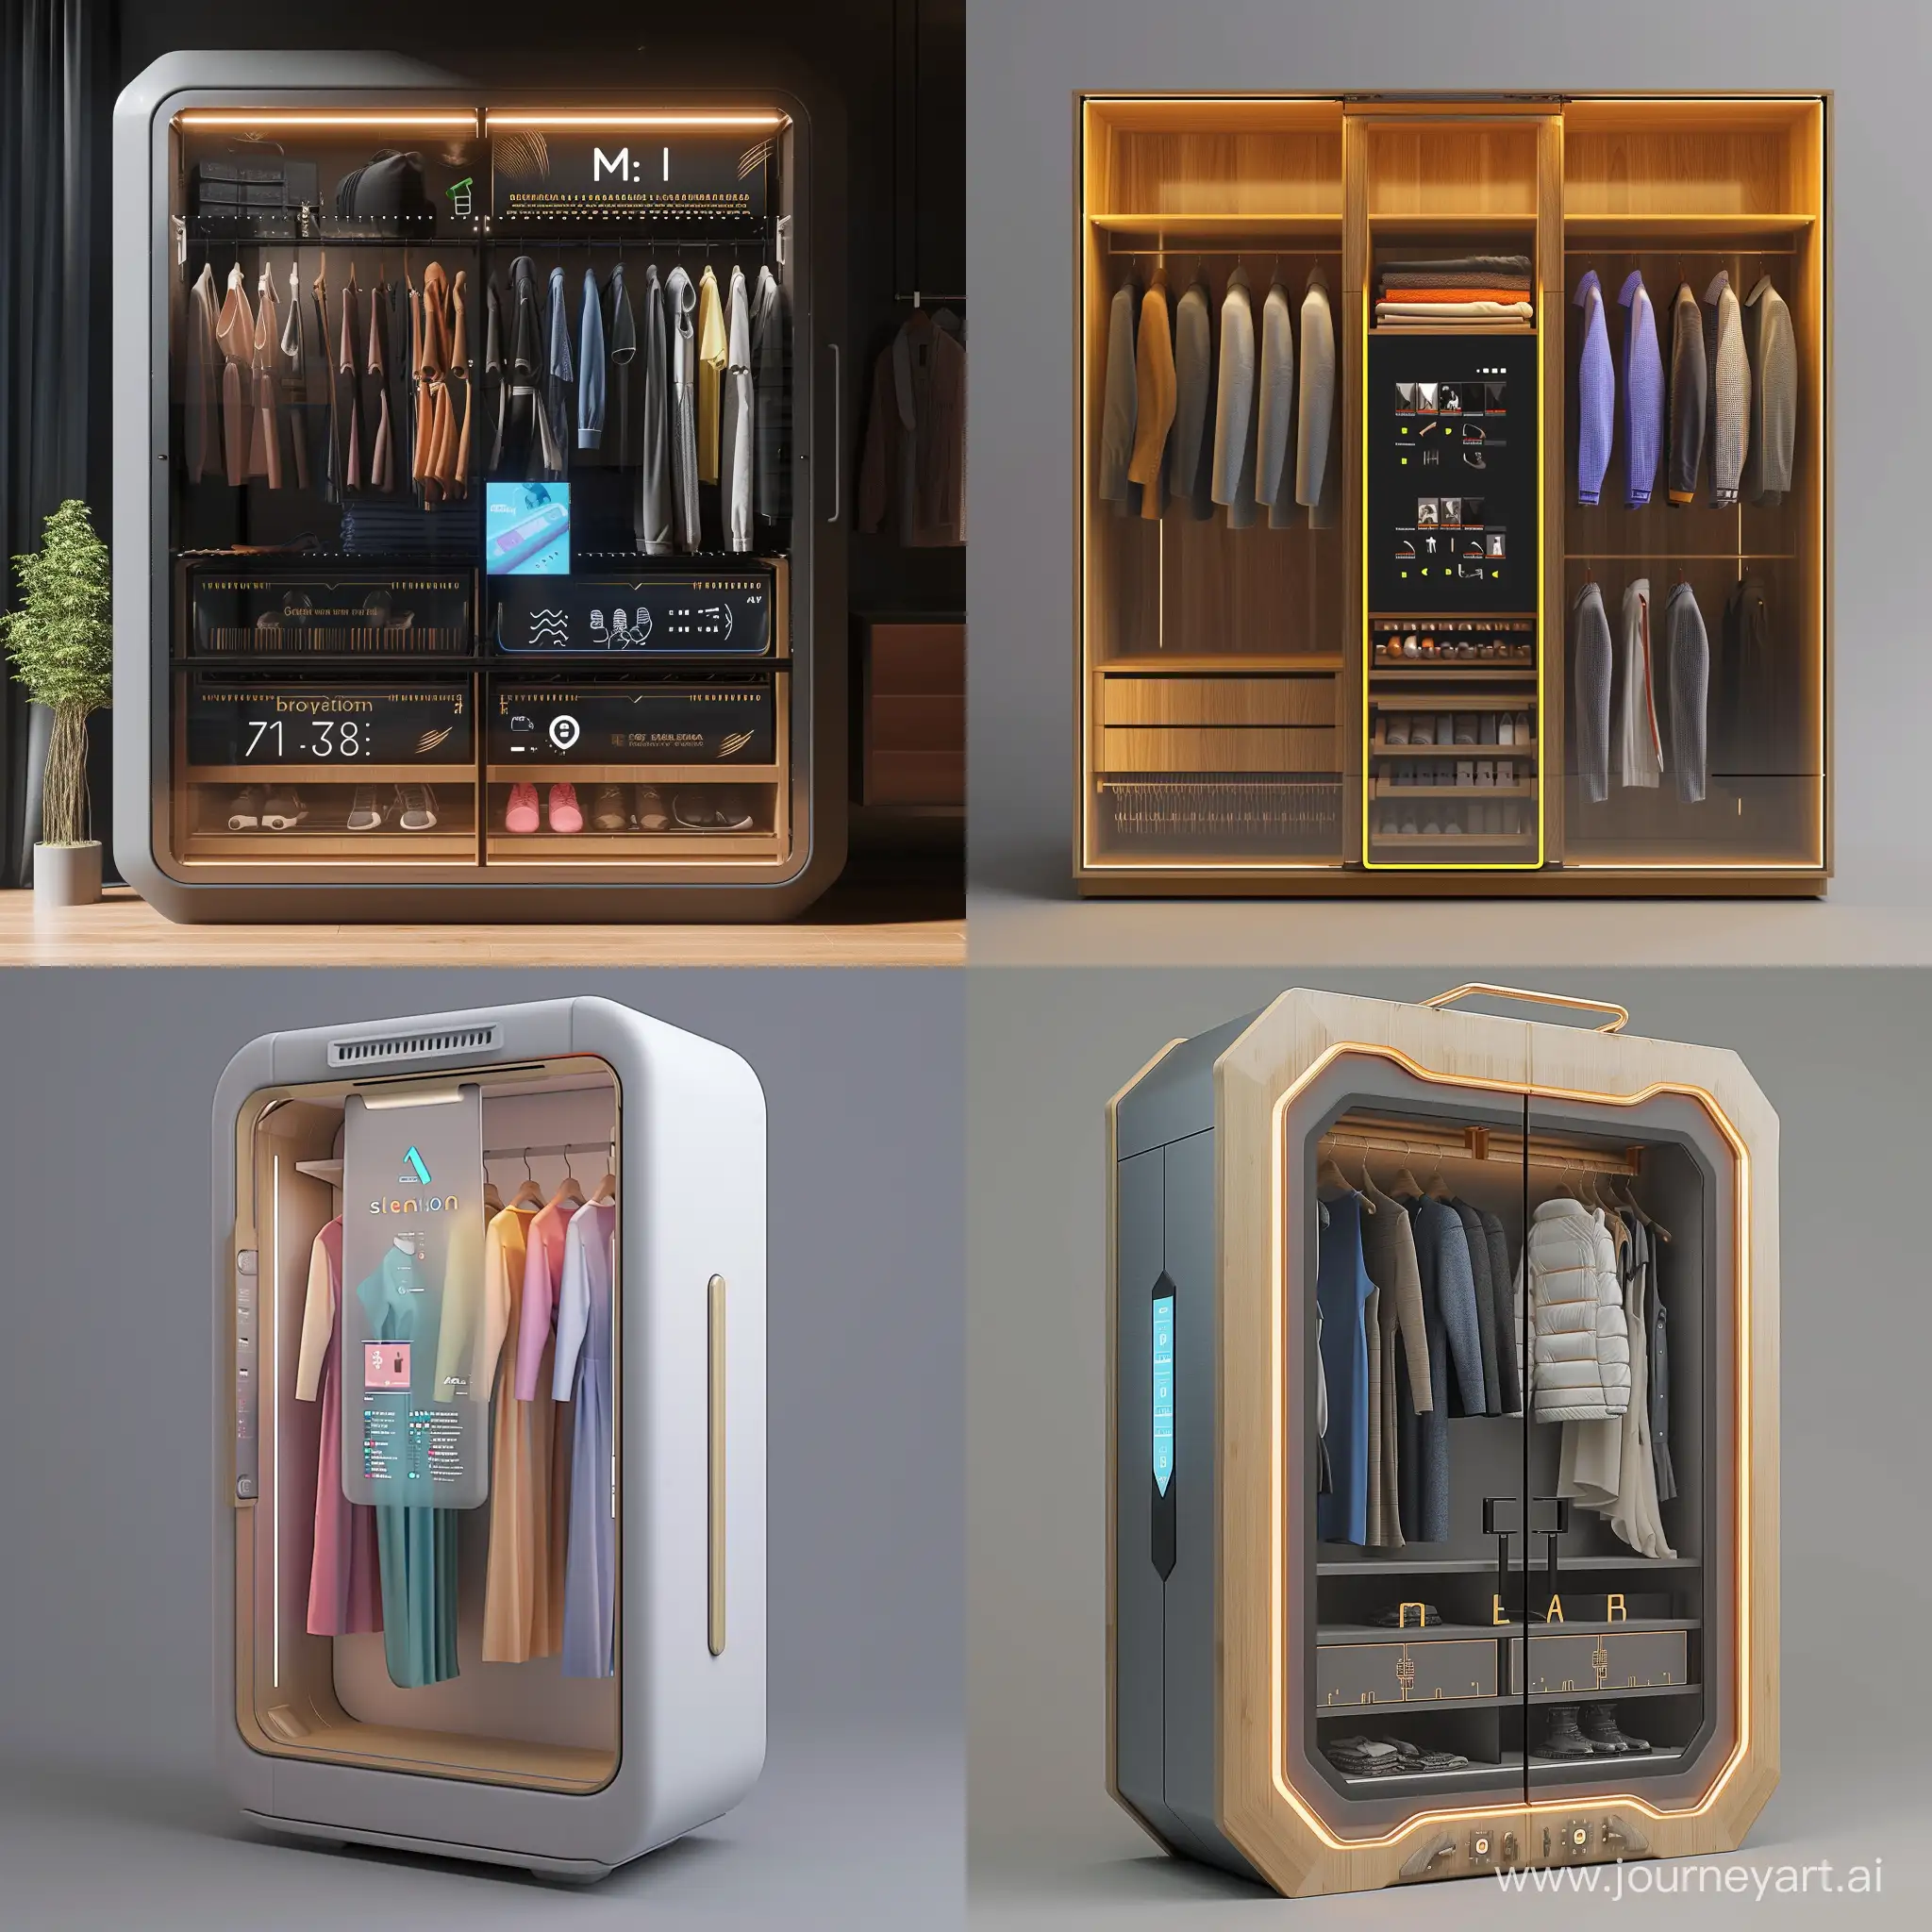 Futuristic-3D-Wardrobe-with-Interactive-Clothing-Selection-Display